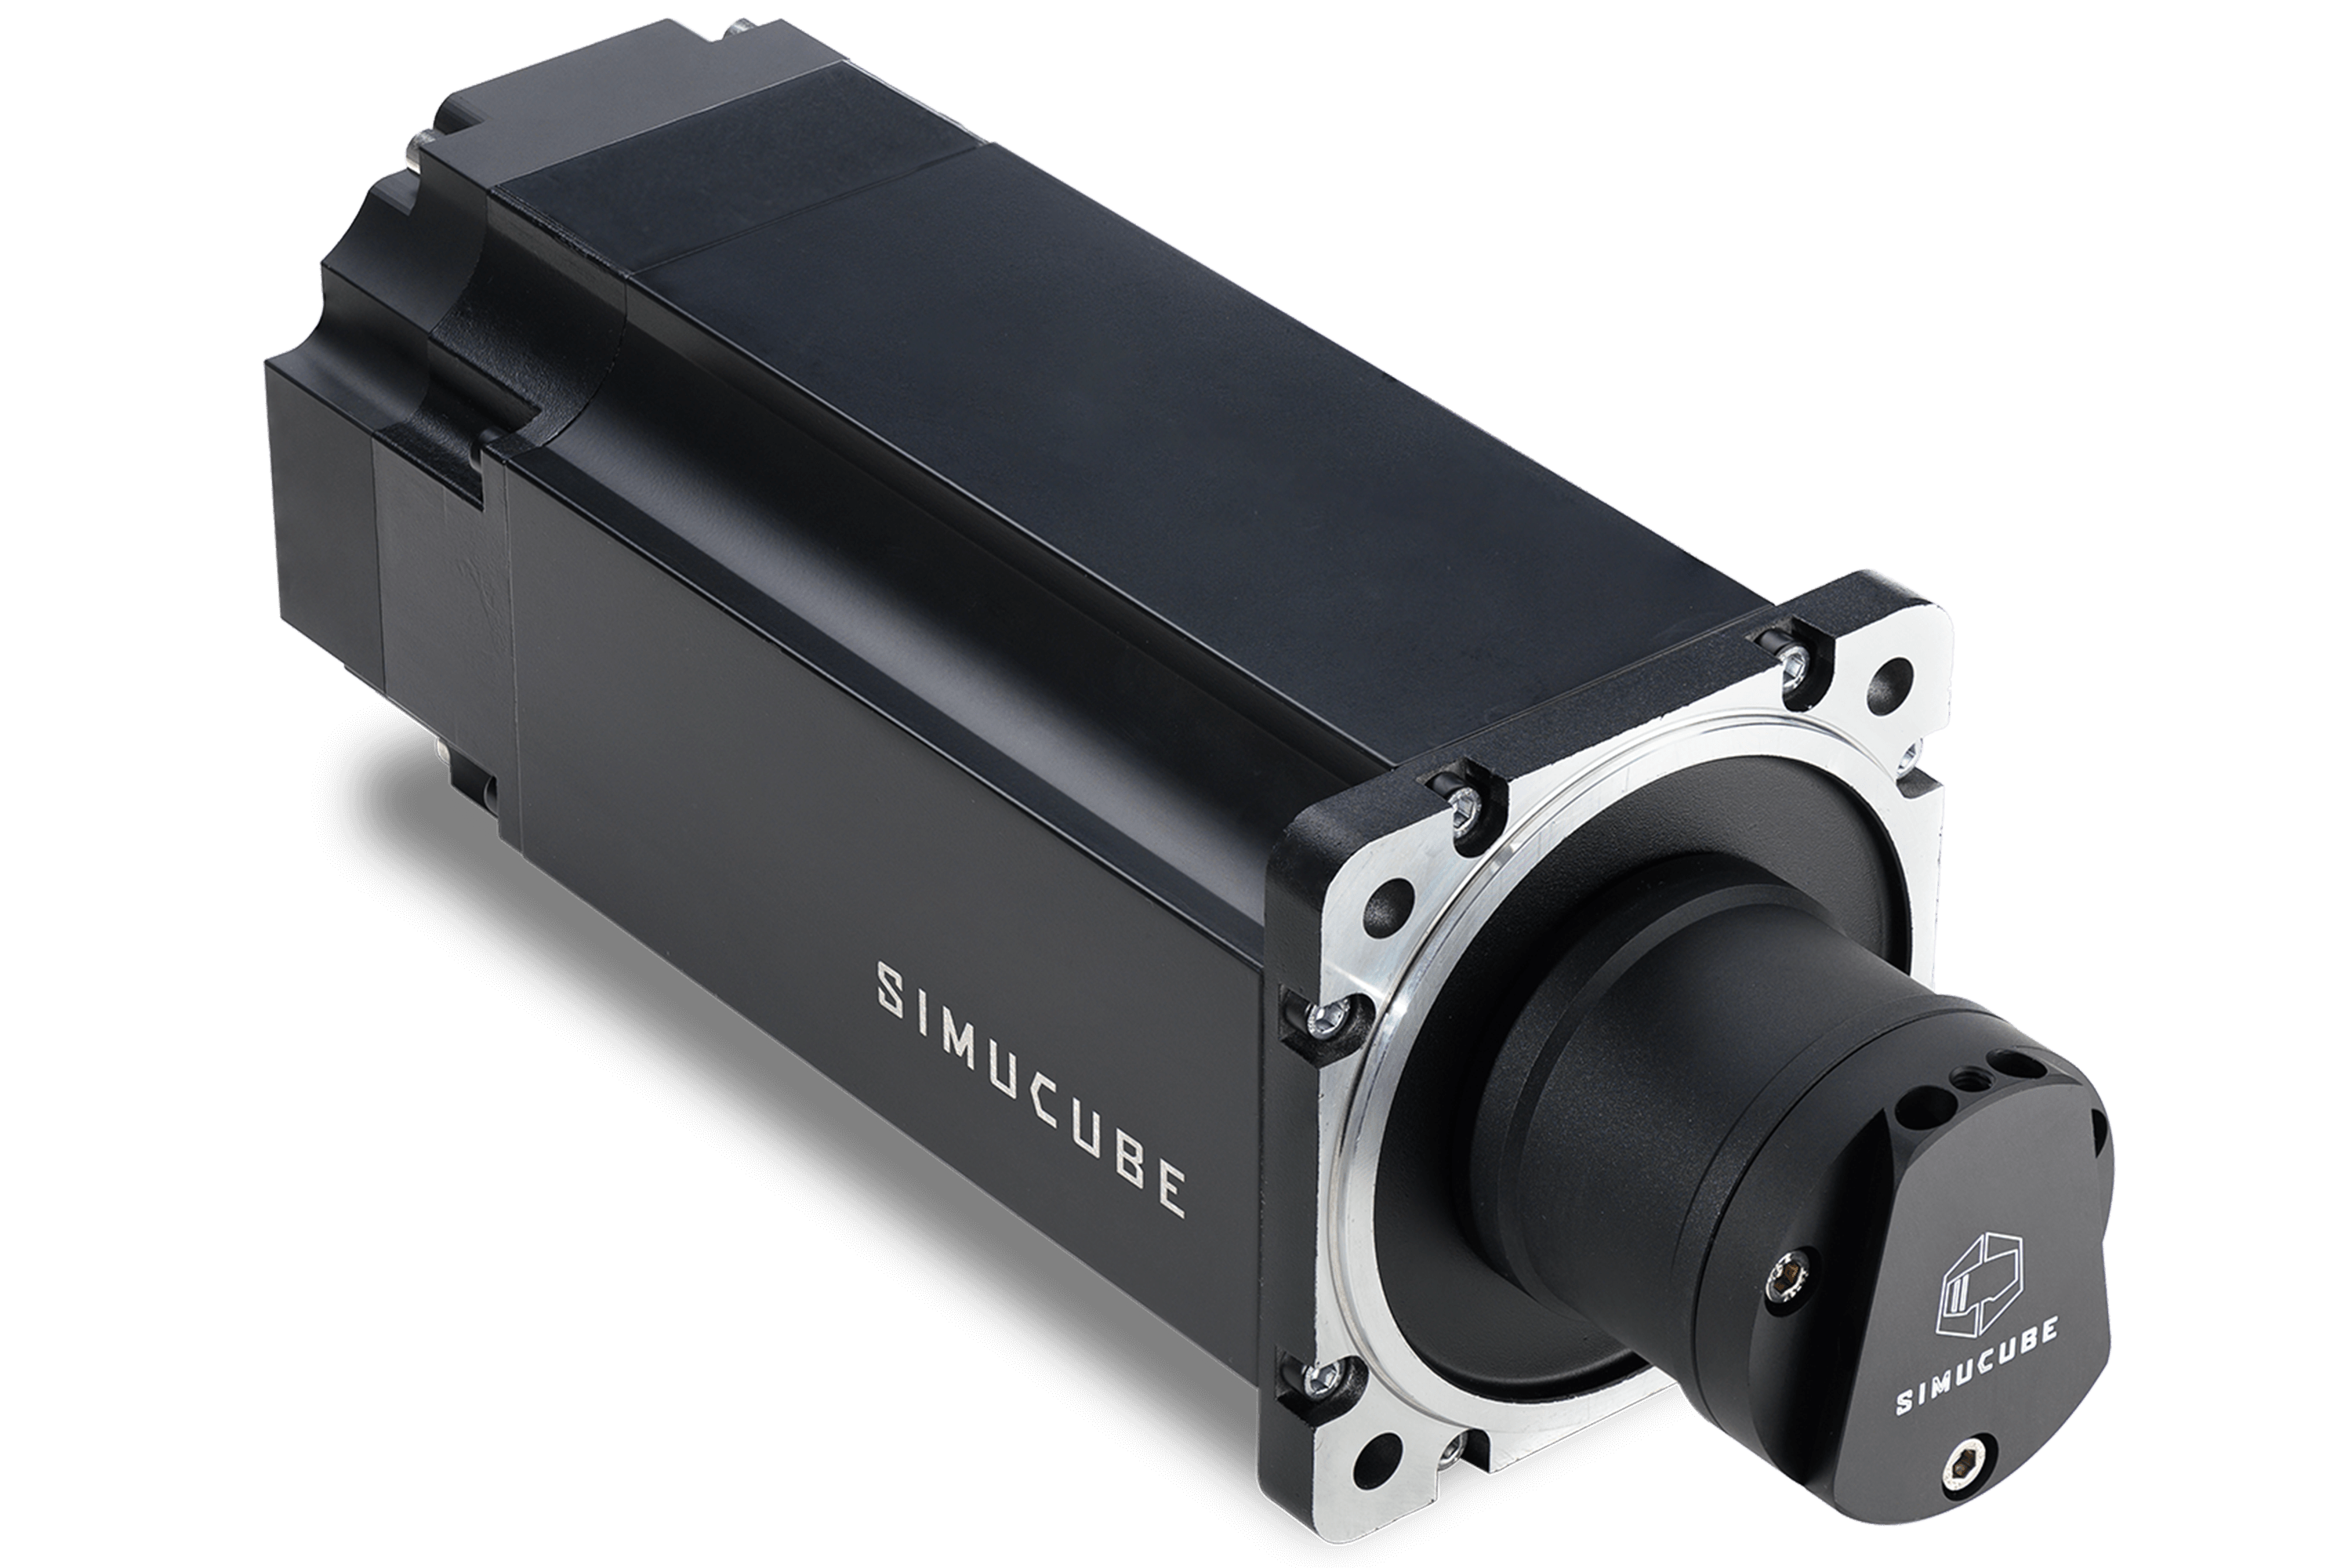 Simucube 2 Ultimate Direct Drive System